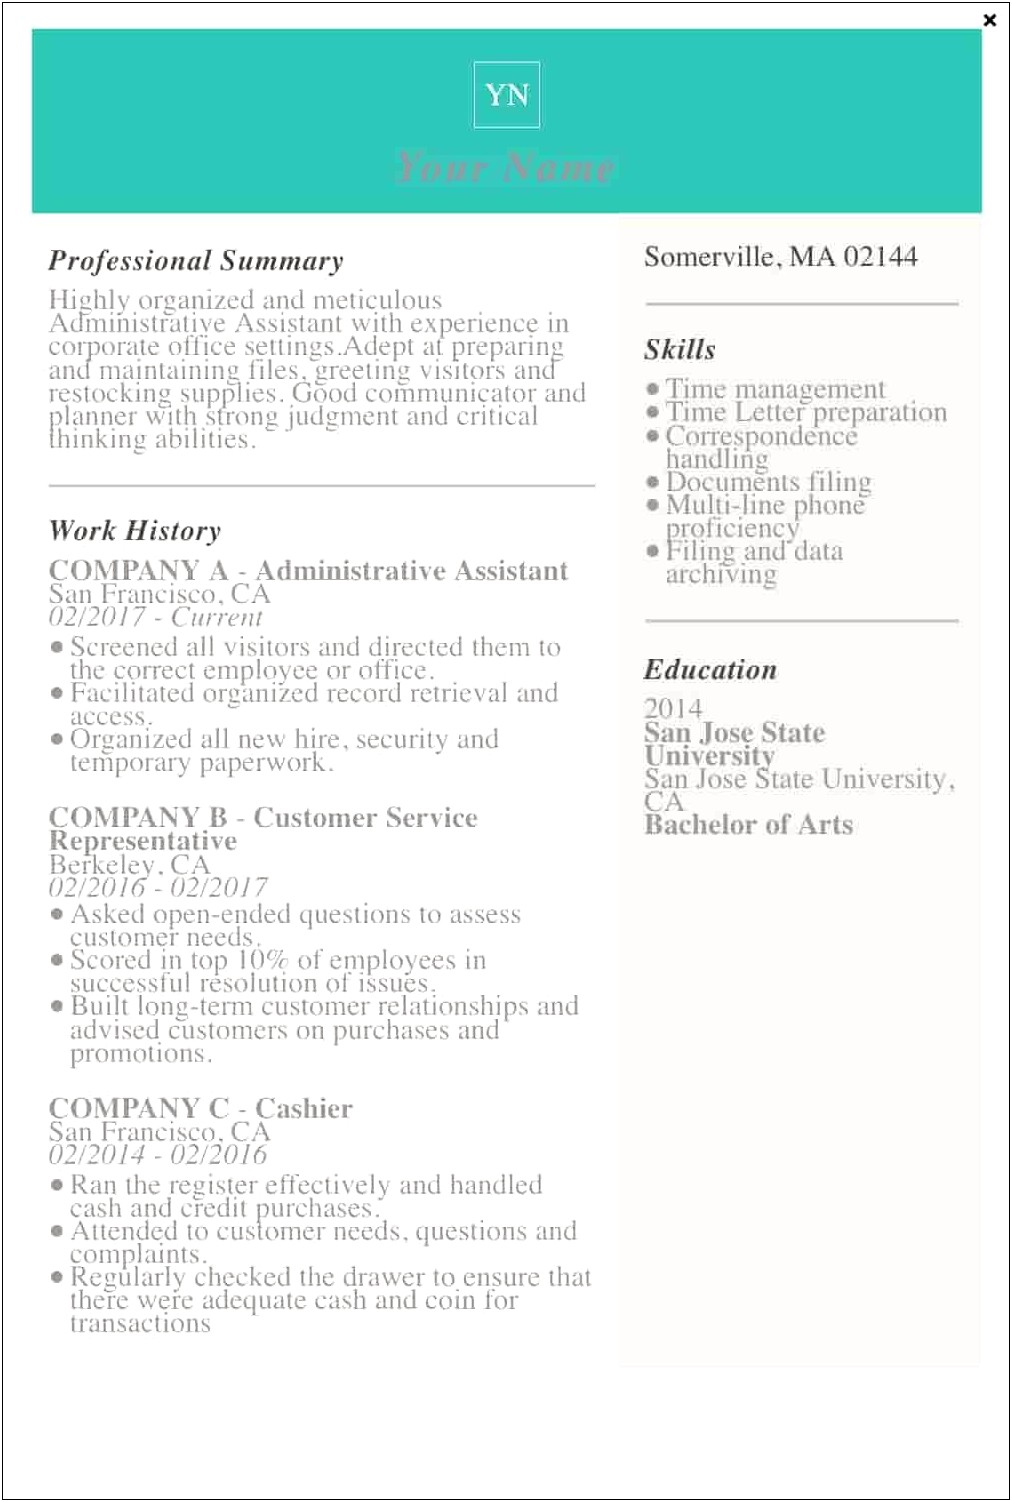 Record And Manage Data Resume